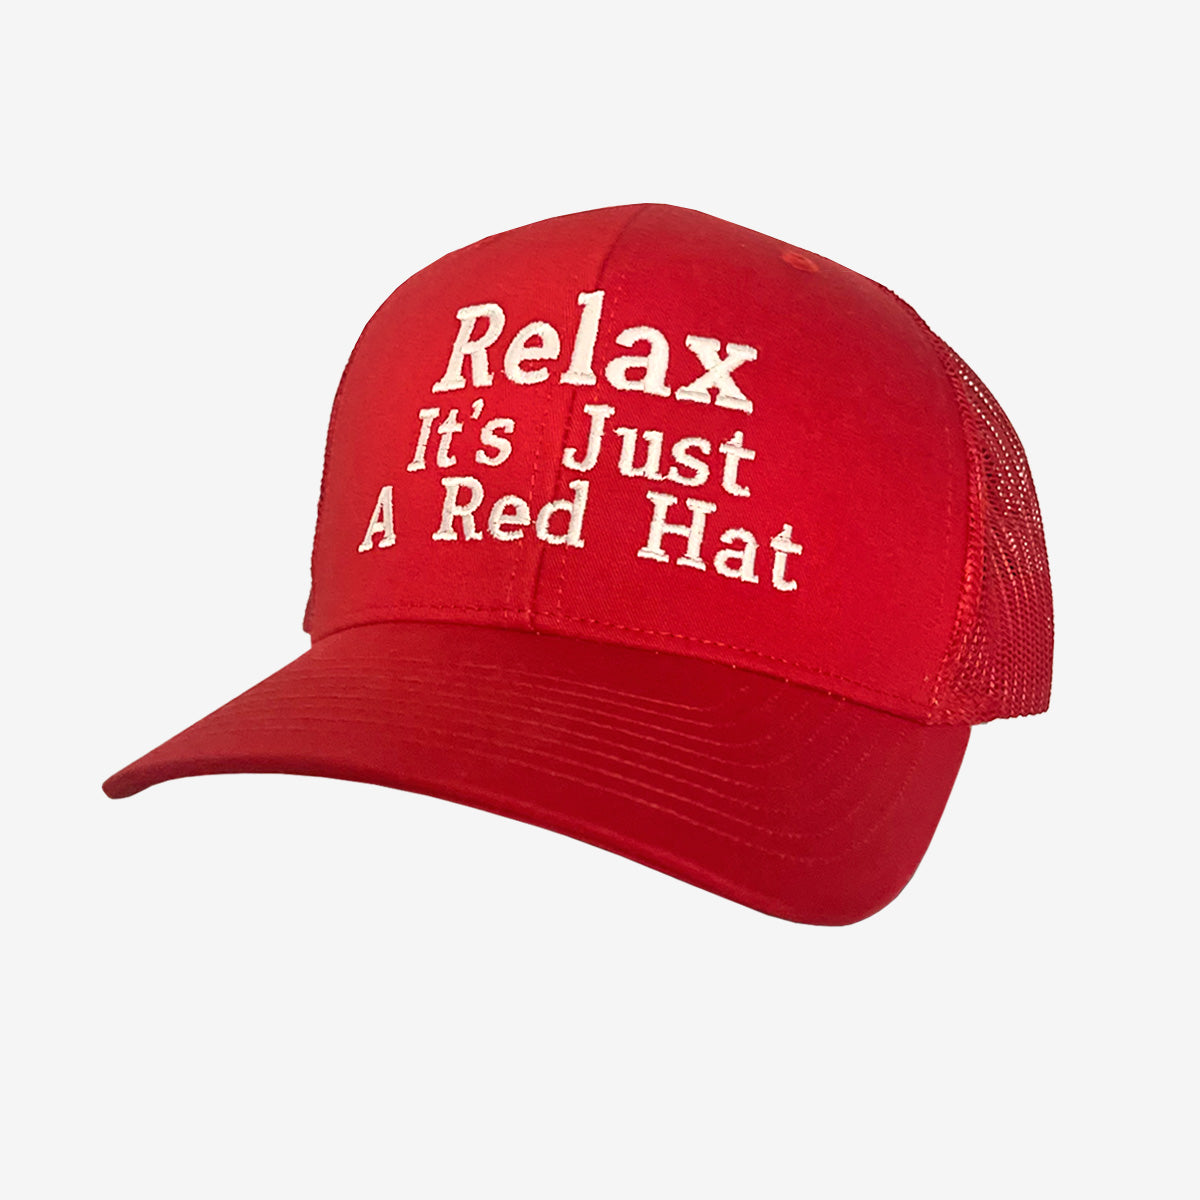 Relax It's Just A Red Hat